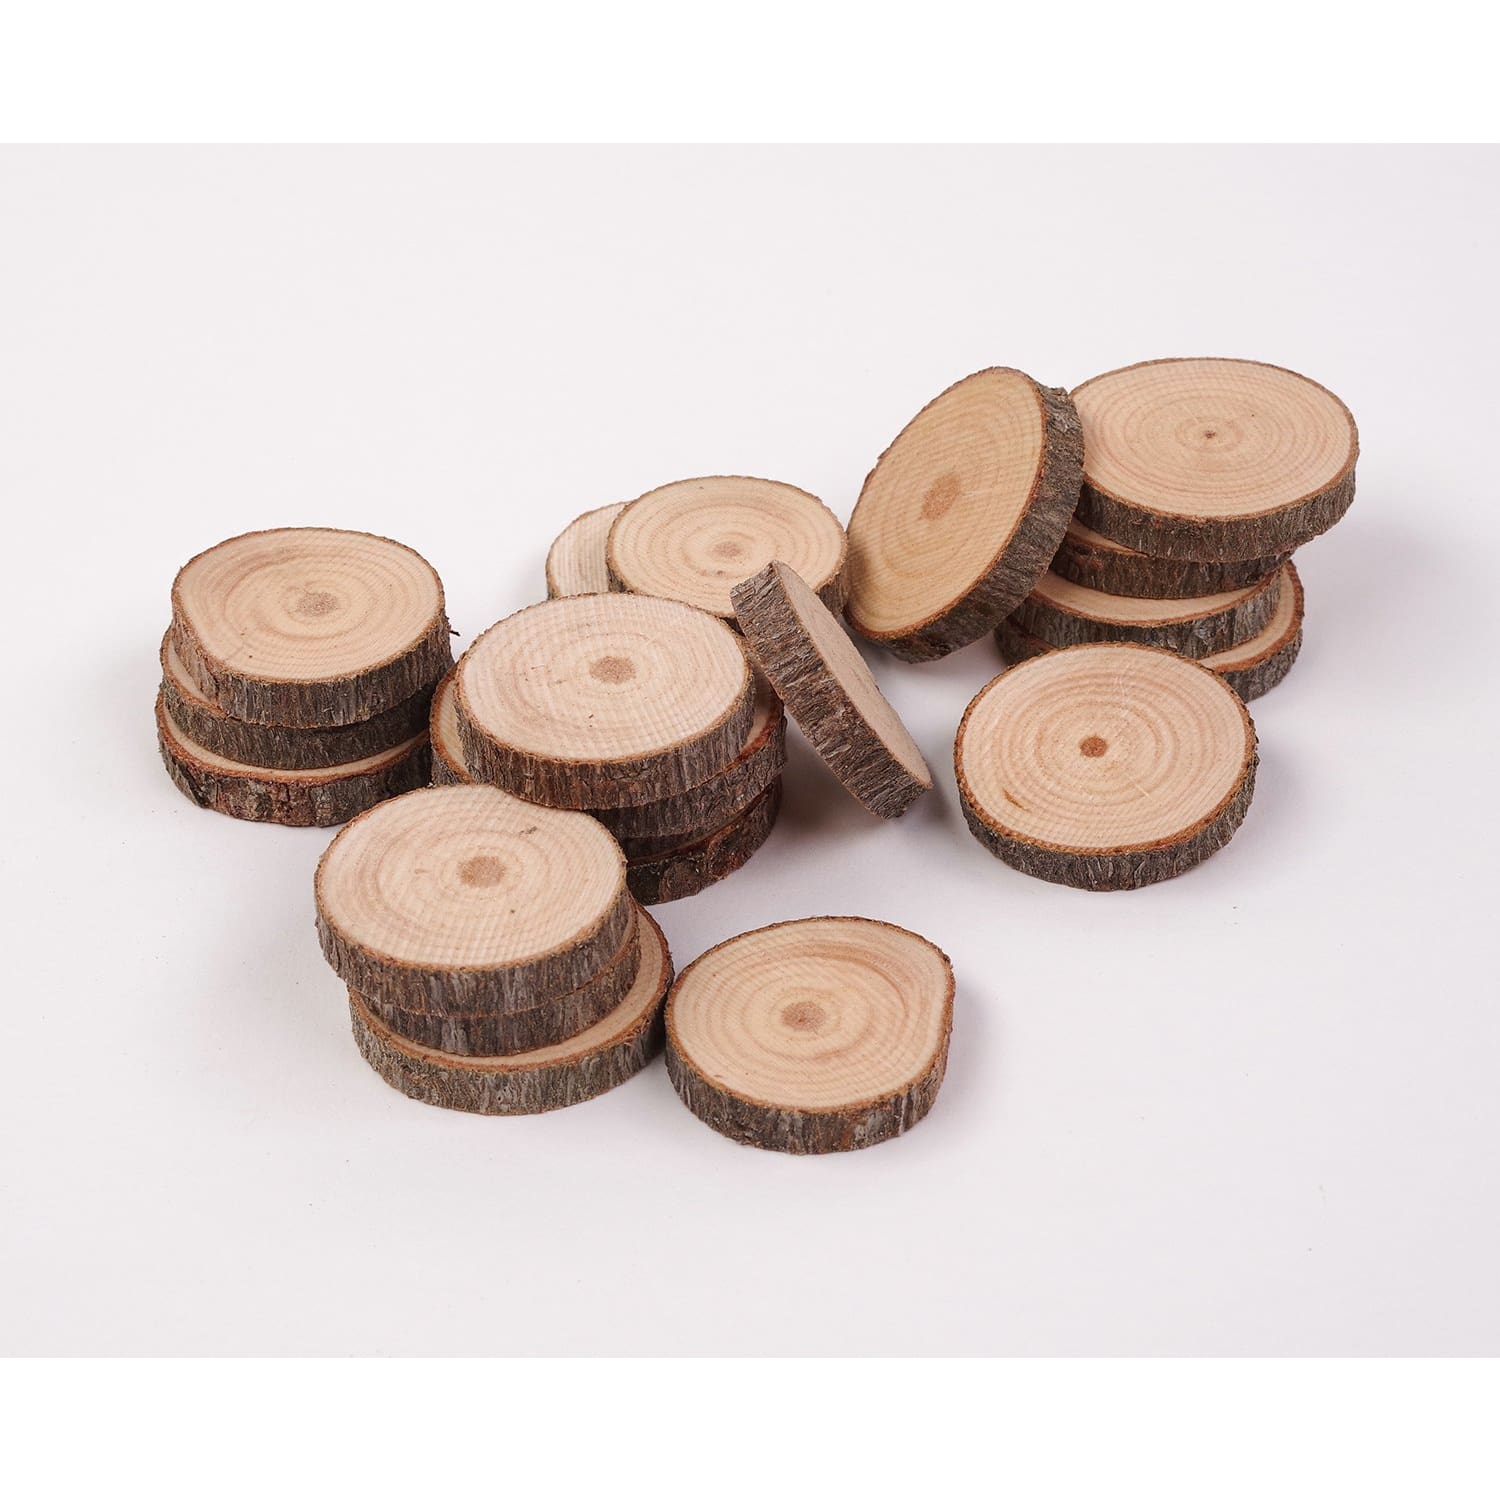 2 - 4 Cm Wood Slices (20 Pack) - Small Wood Slices